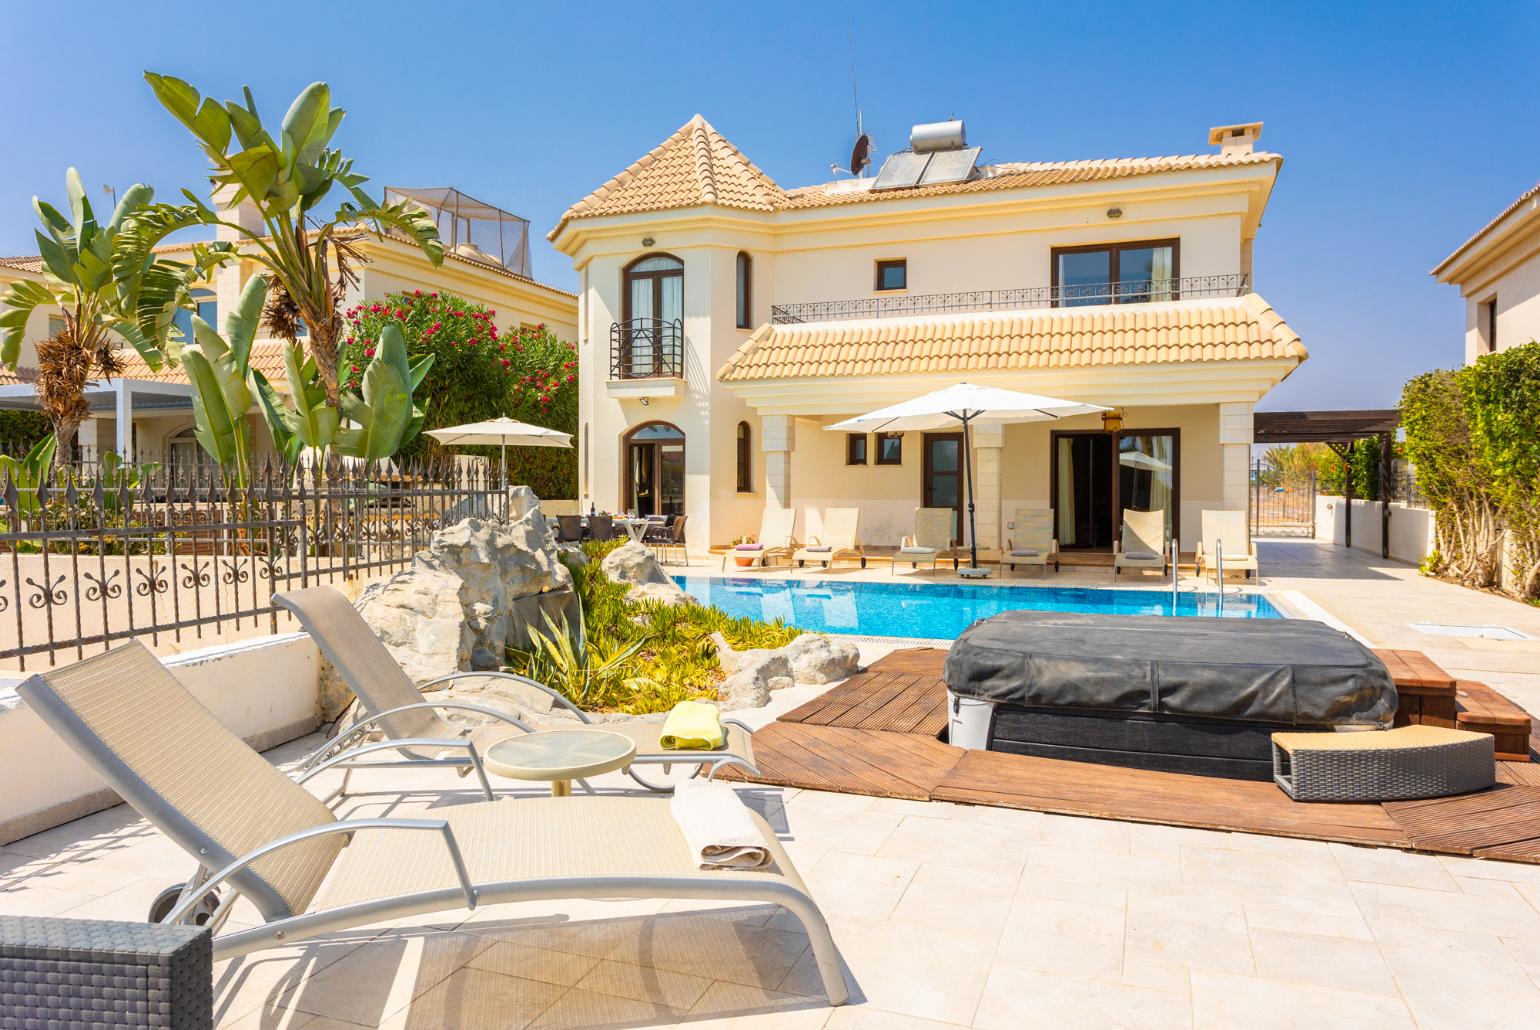 Beautiful villa with private pool, jacuzzi, terrace, and garden with sea views